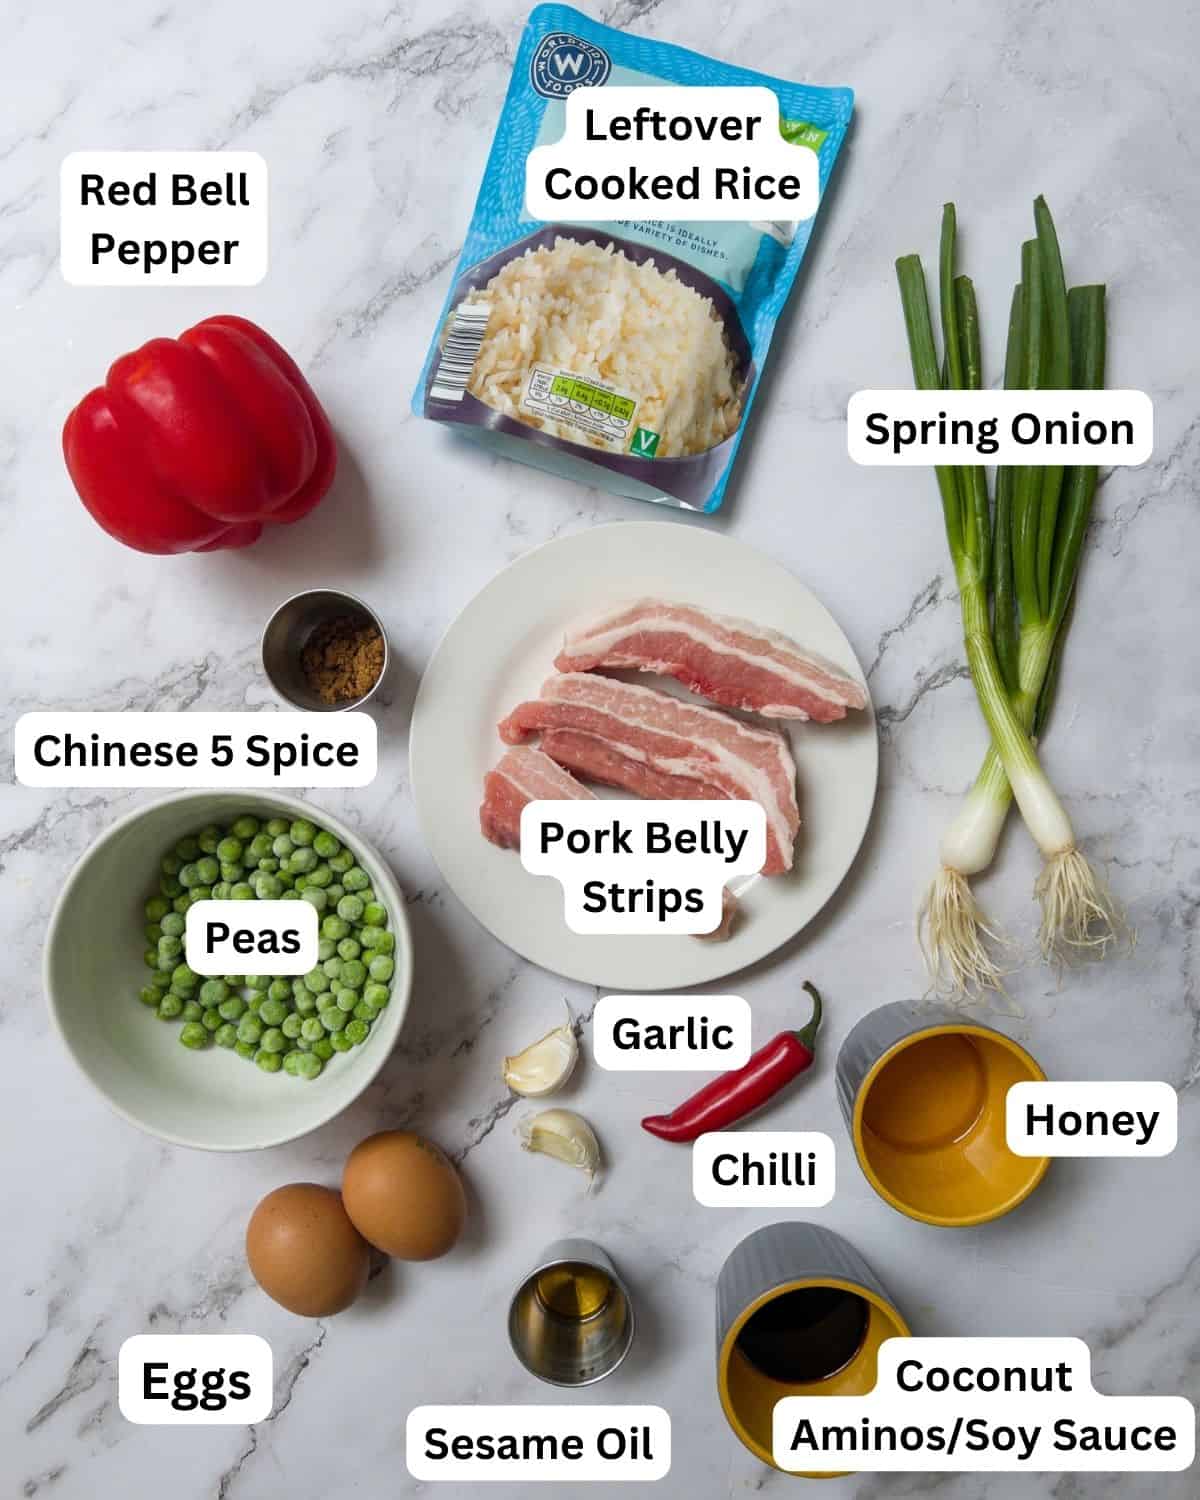 Ingredients laid out for pork belly fried rice.